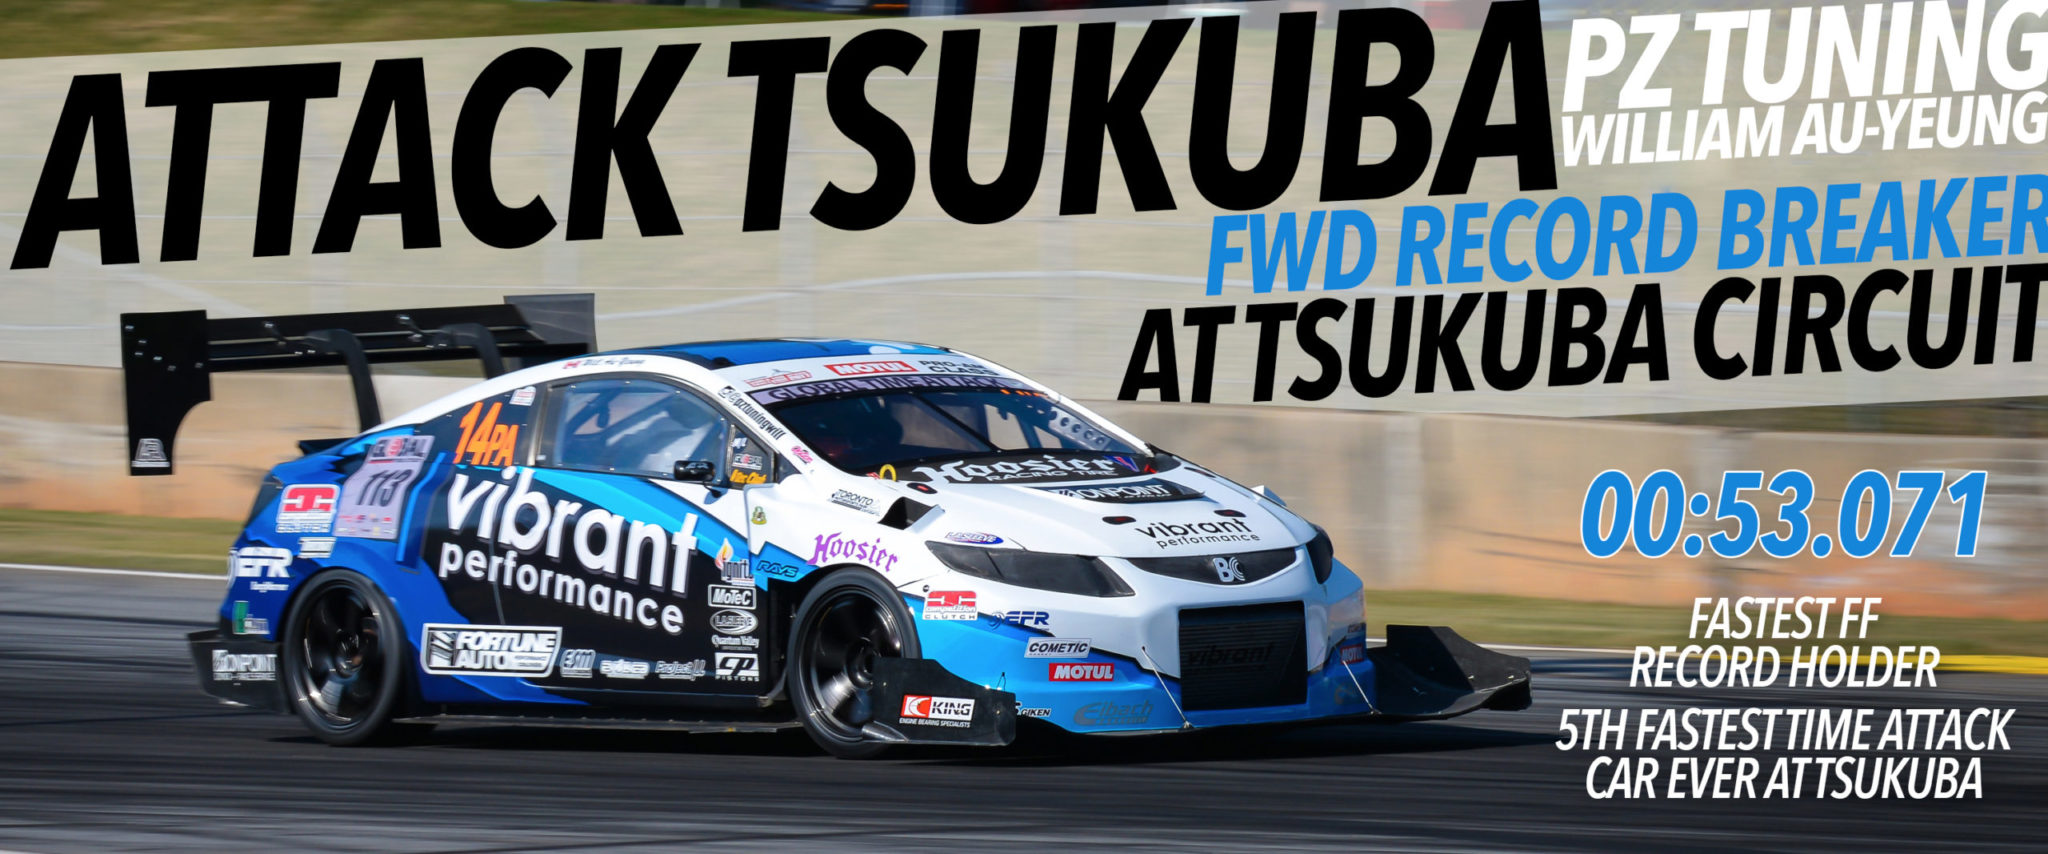 Performance coilovers by fortune auto setting the attack tsukuba fed record on attsukuba circuit